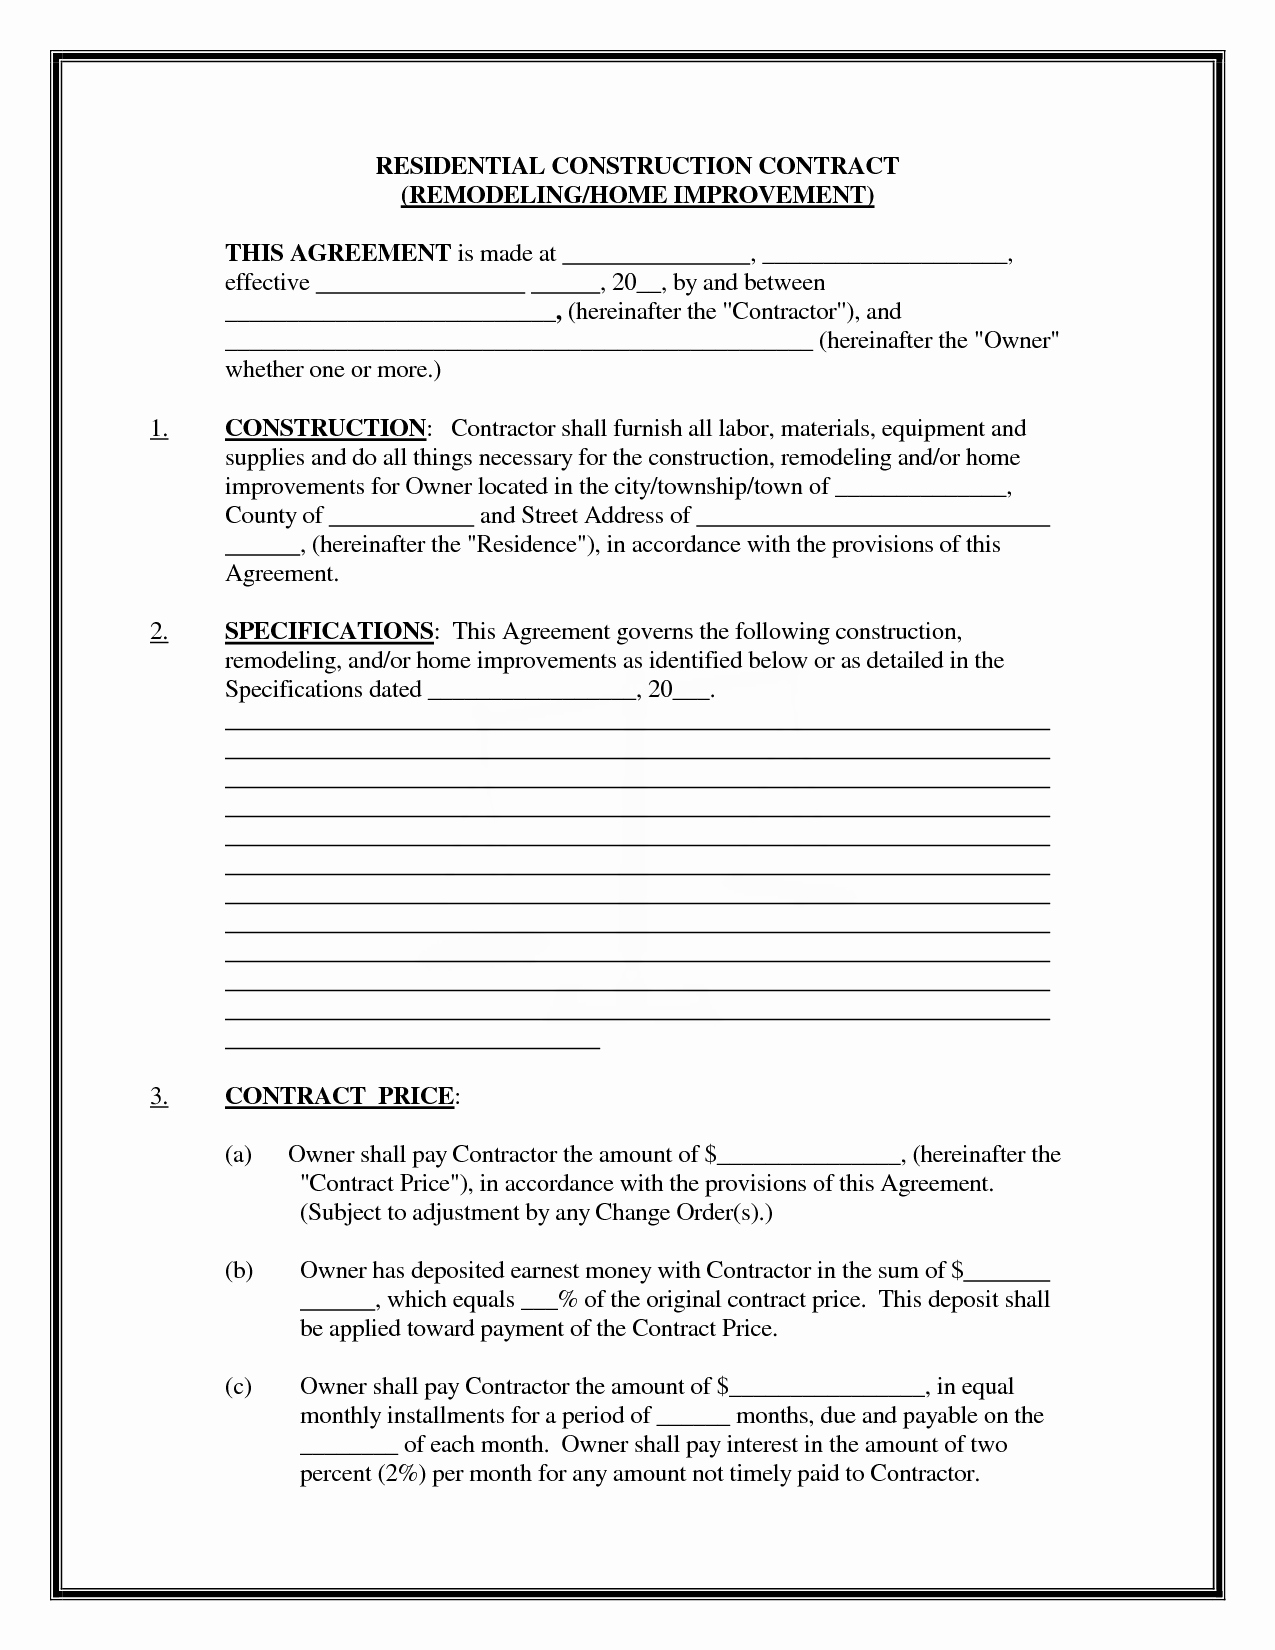 Residential Snow Removal Contract Template Elegant Construction Remodeling Contract – Emmamcintyrephotography